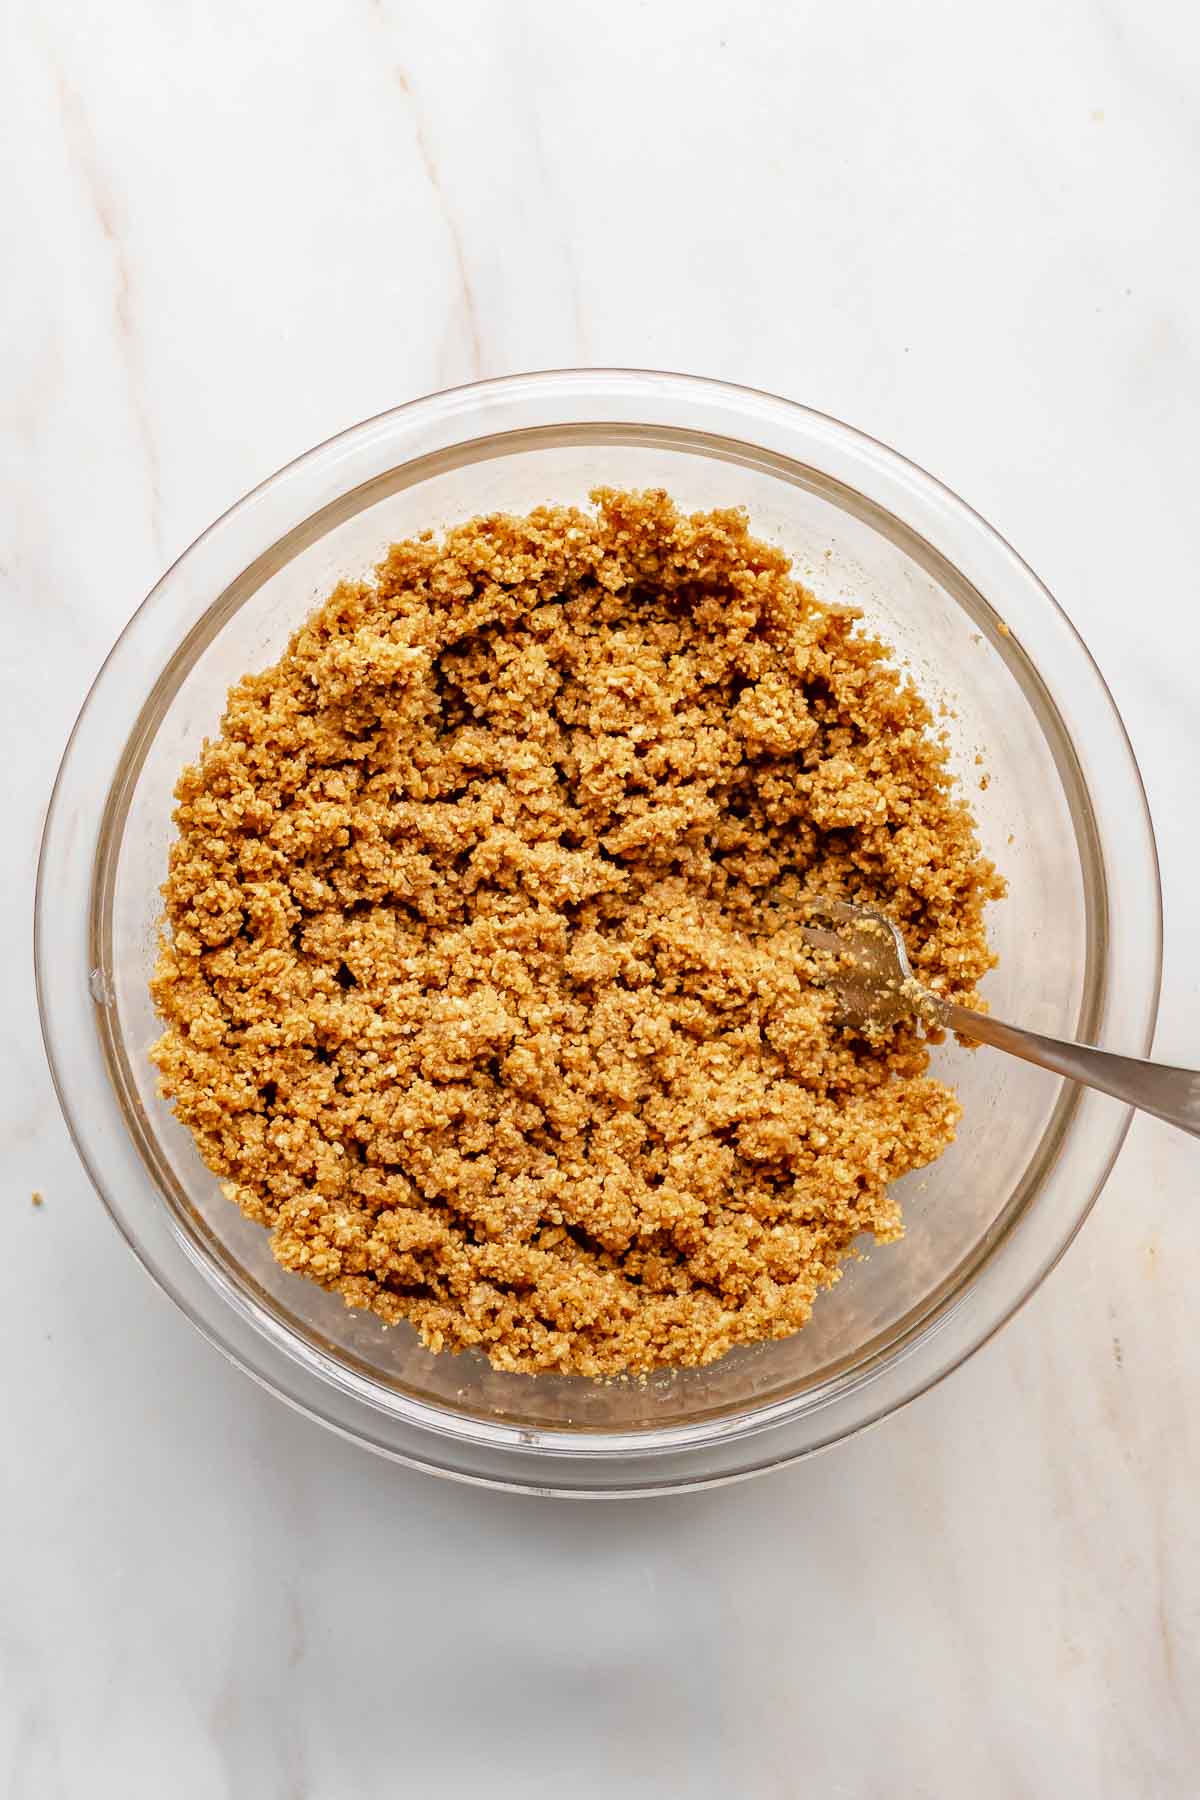 Graham cracker crust in a bowl with a fork.